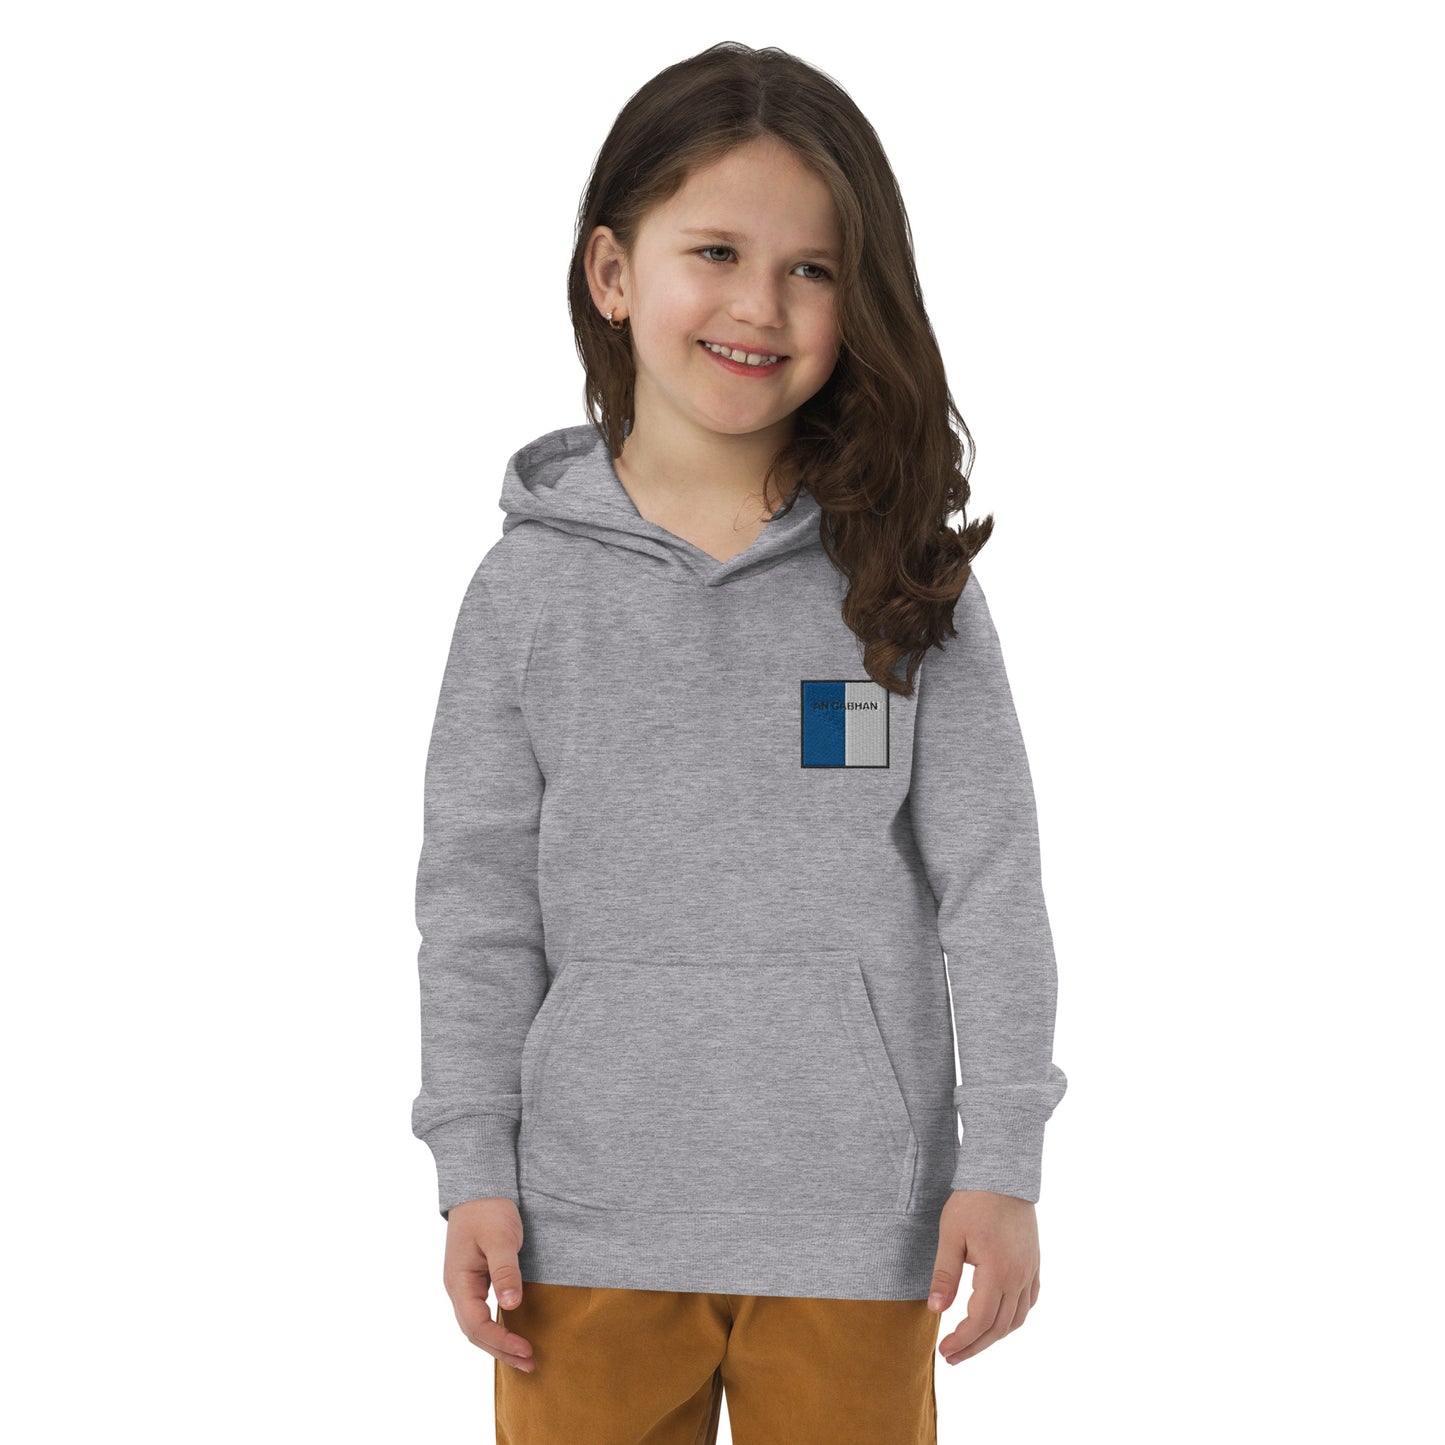 Embroidered Child Eco Hoodie an Cabhán